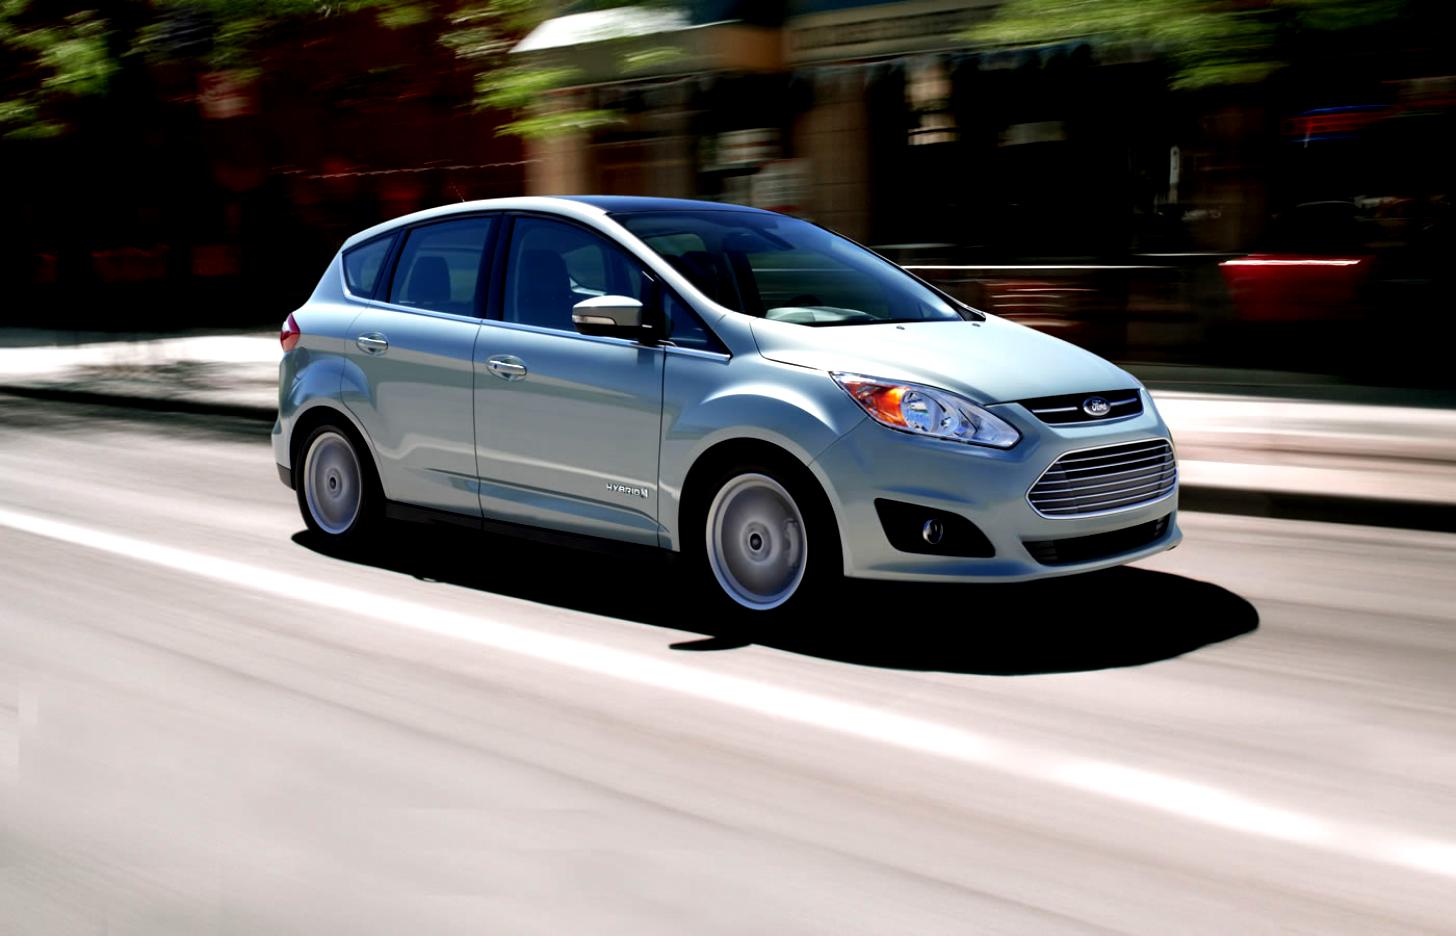 Ford C-Max 2014 #1